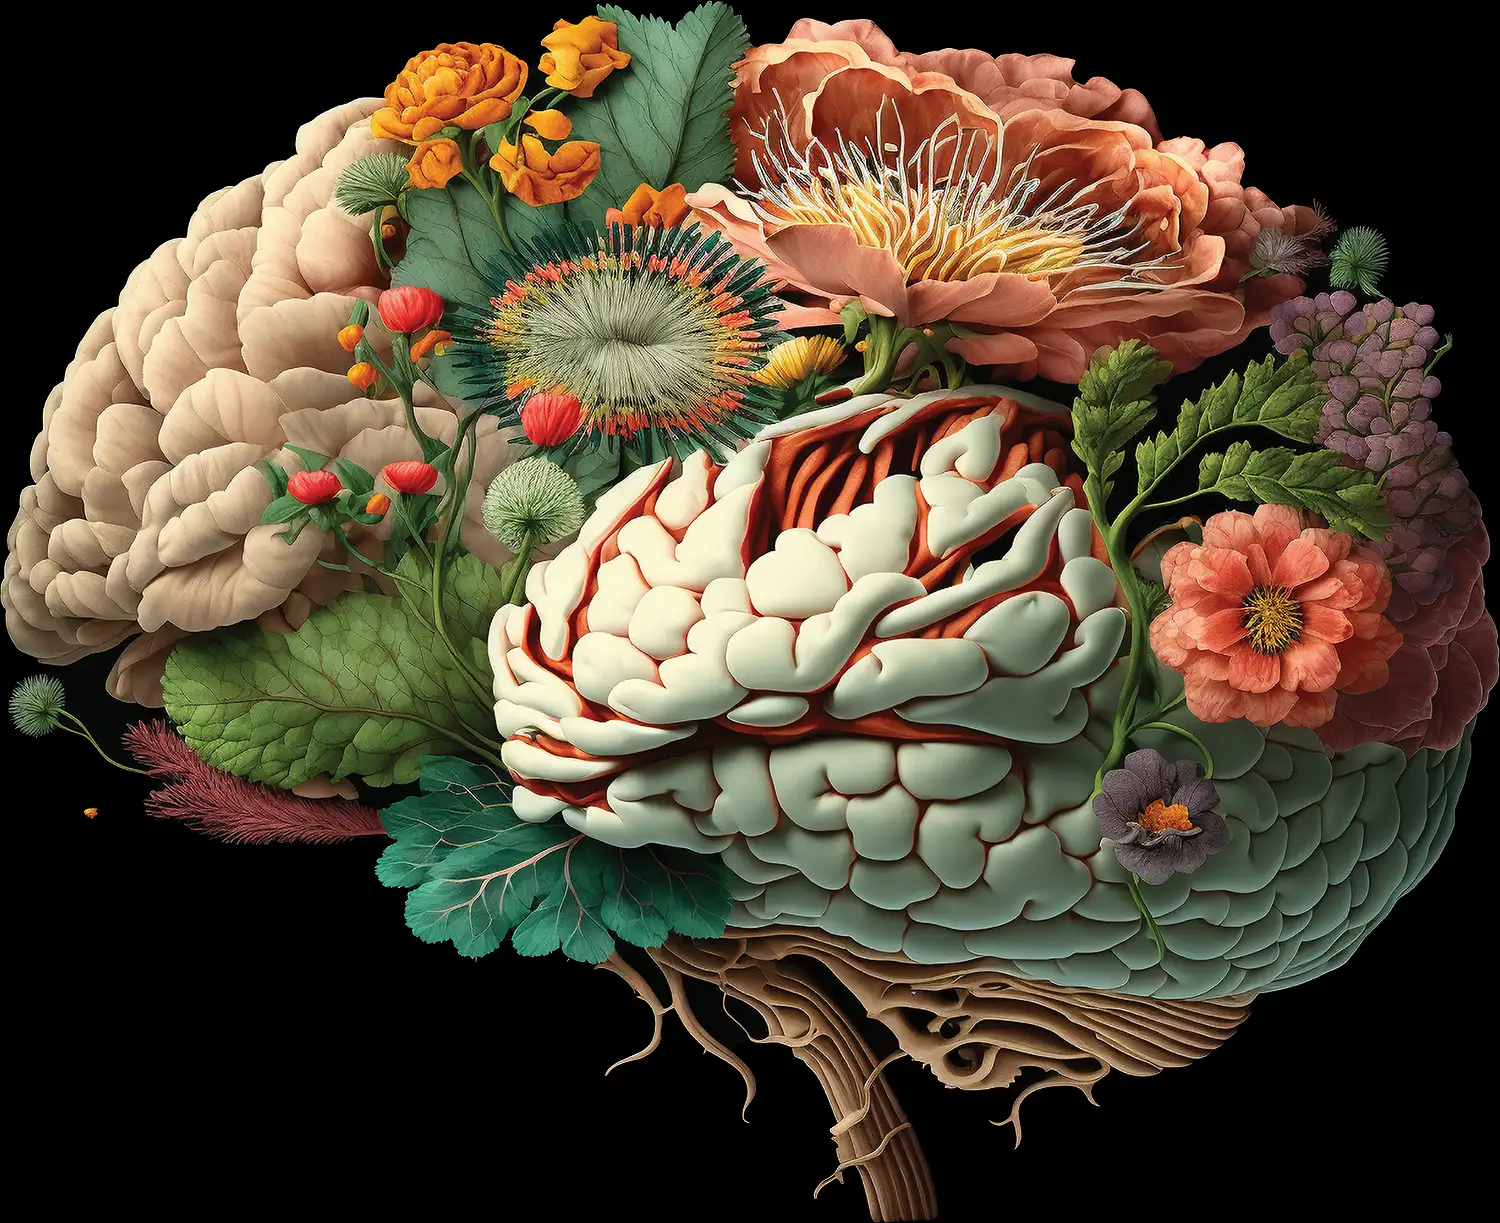 artistic rendering of a brain made of flowers